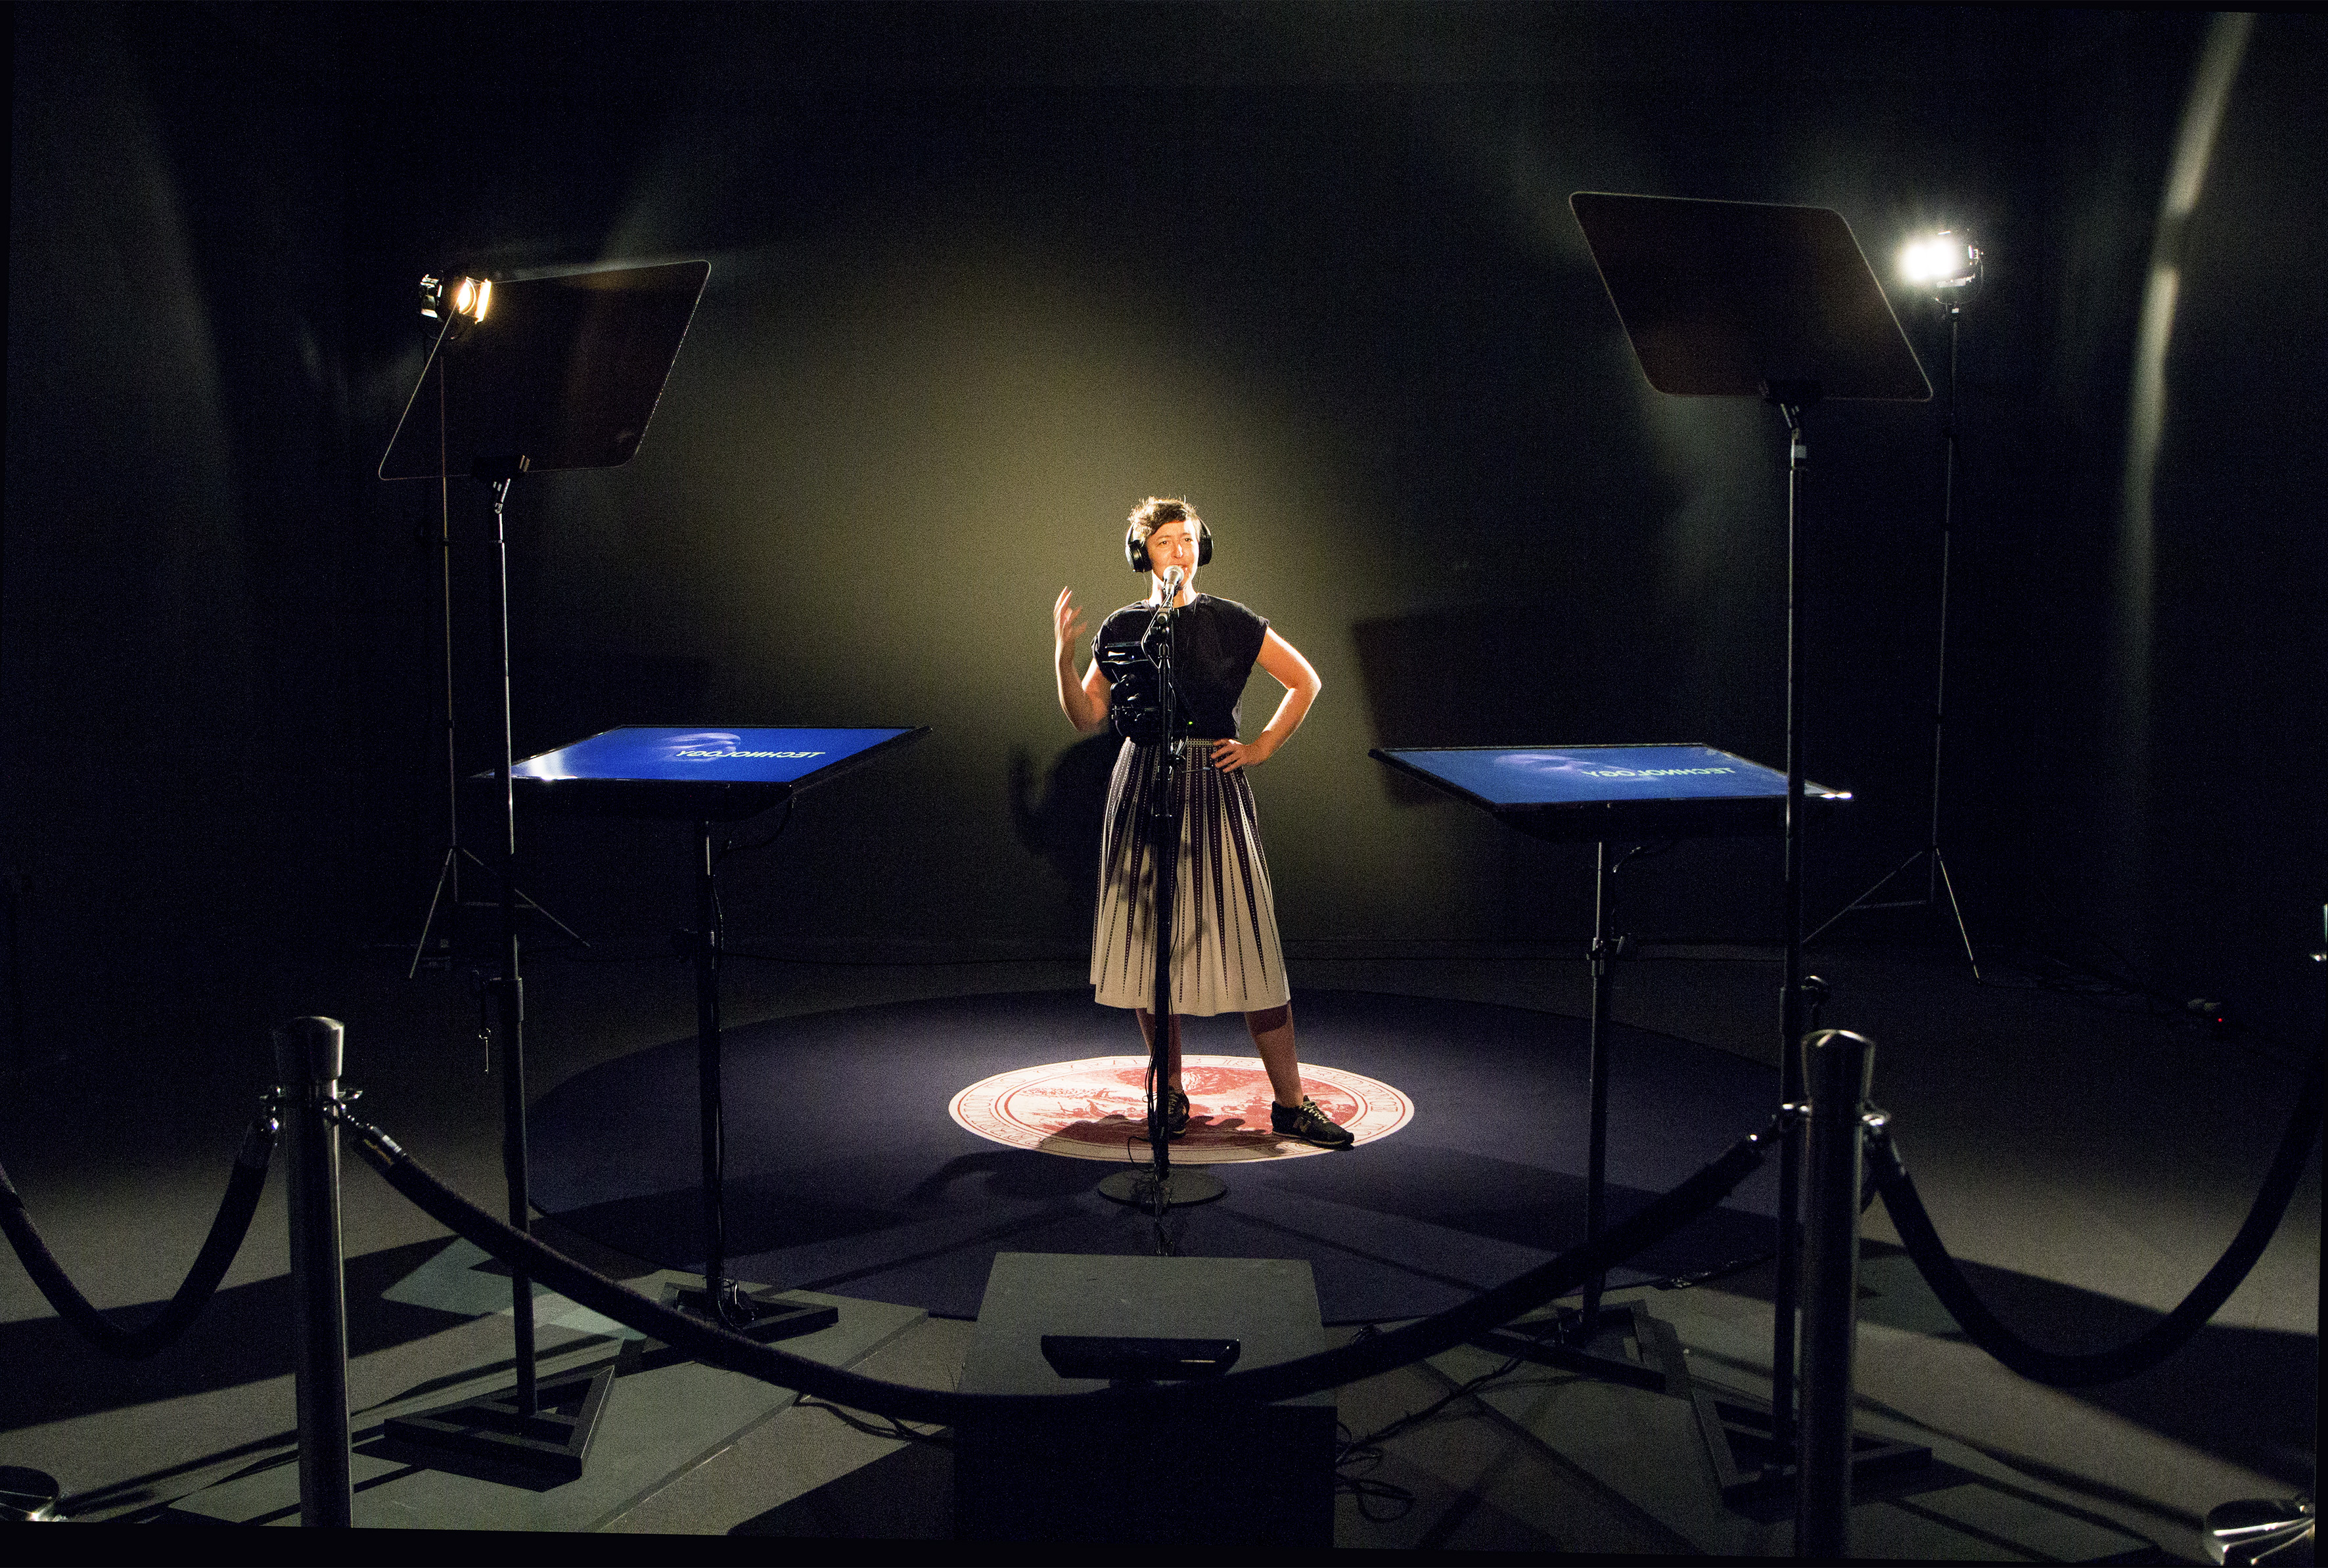 A woman standing in a dark room atop a regal rug imprinted with the rejected seal for the United States. In front of her are two teleprompters as she appears mid-speech.